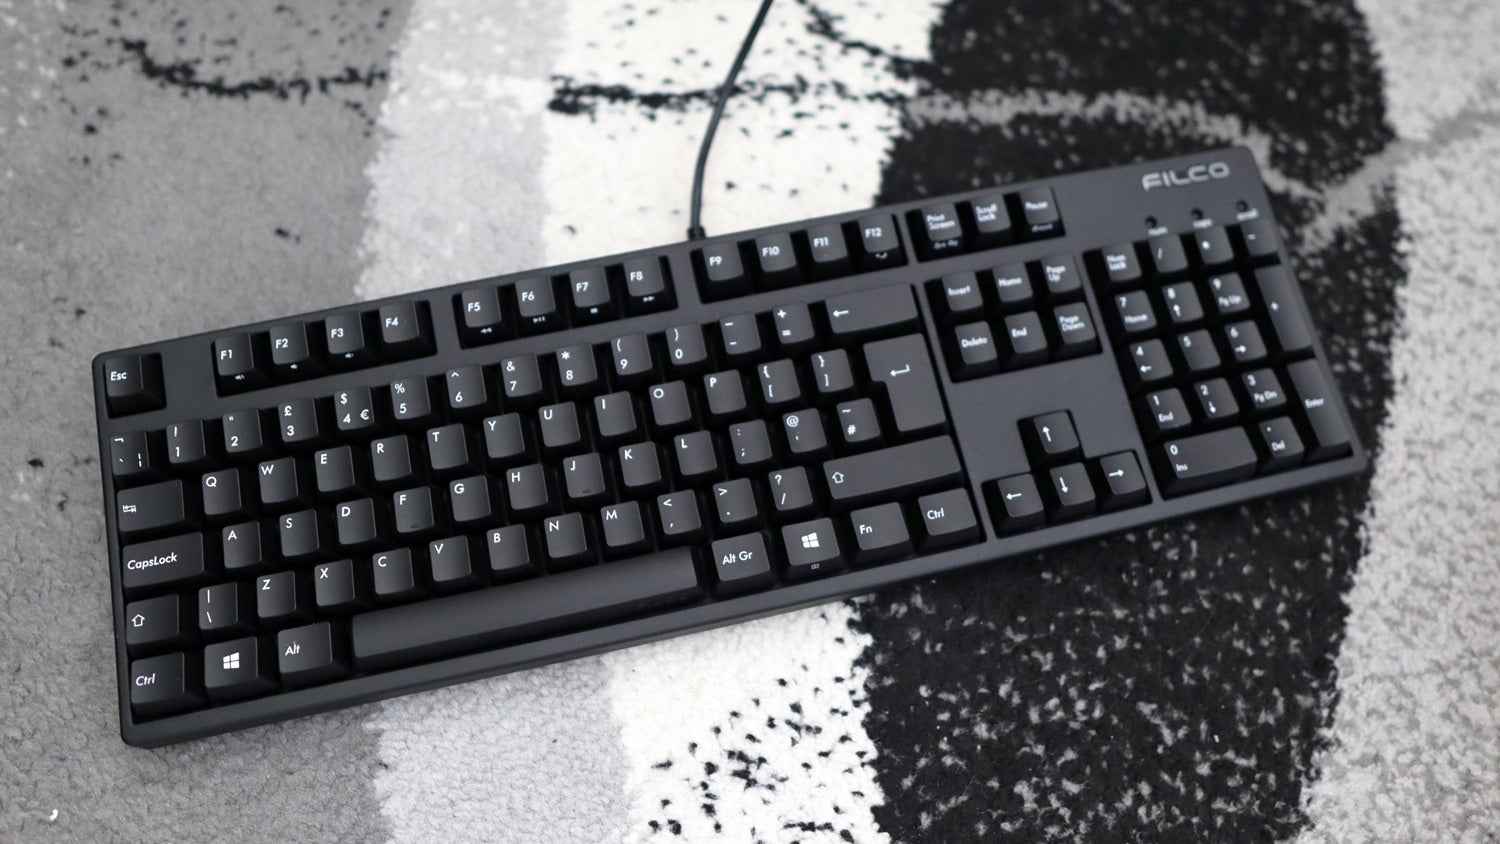 Filco Majestouch 3 keyboard review: a long-awaited upgrade that